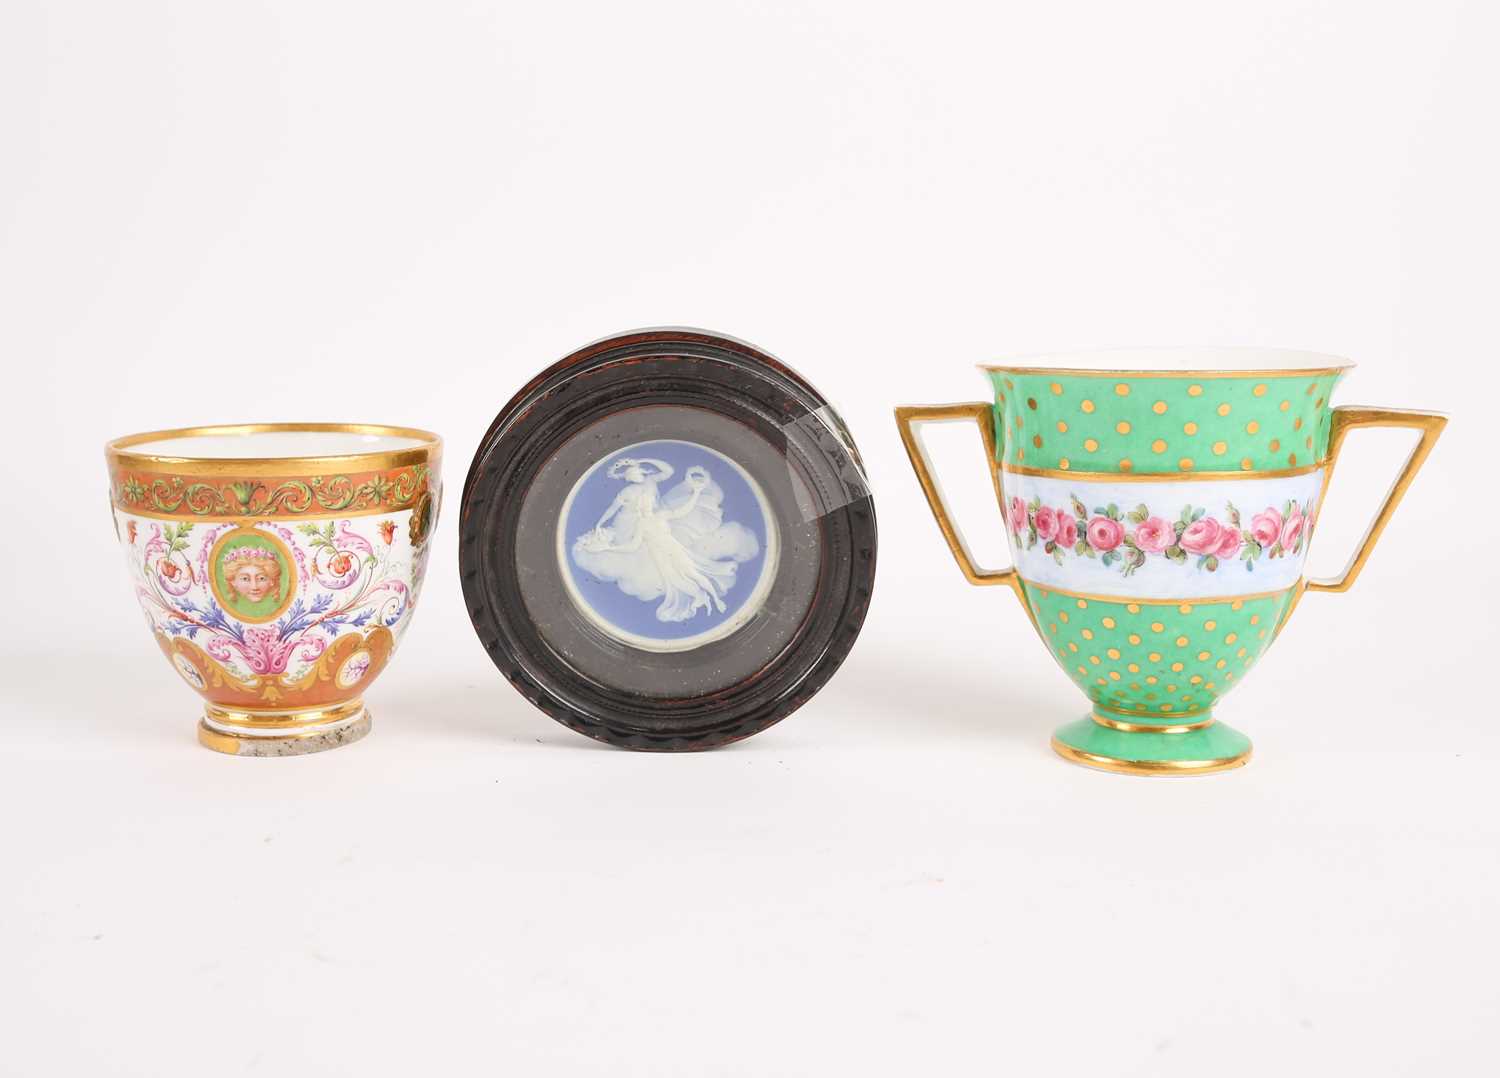 A late 18th century Serves two handled cup, with a raised central band decorated with roses and